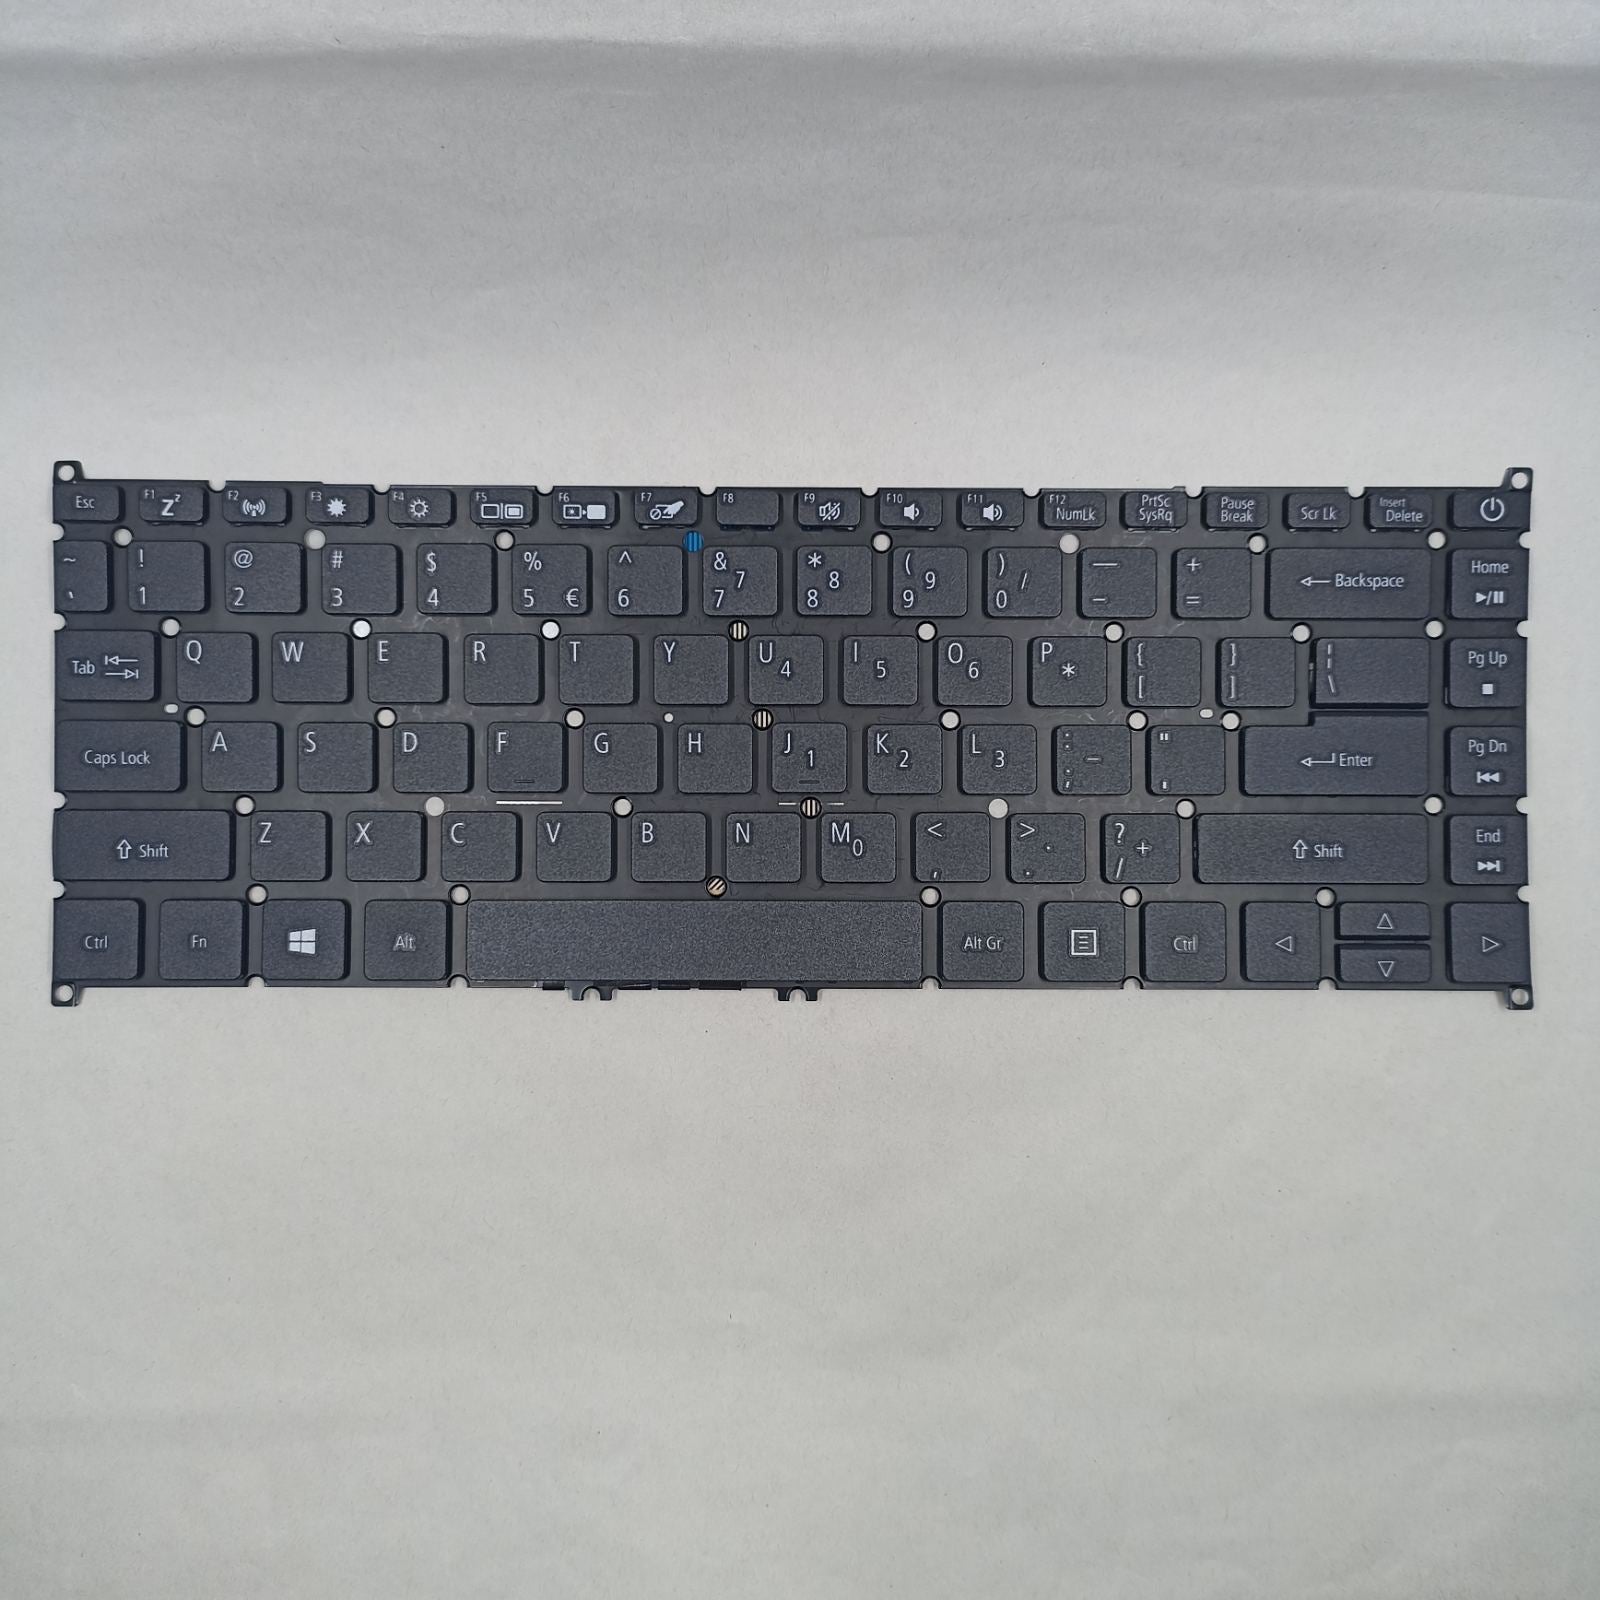 Replacement Keyboard for Acer A514-53 A1